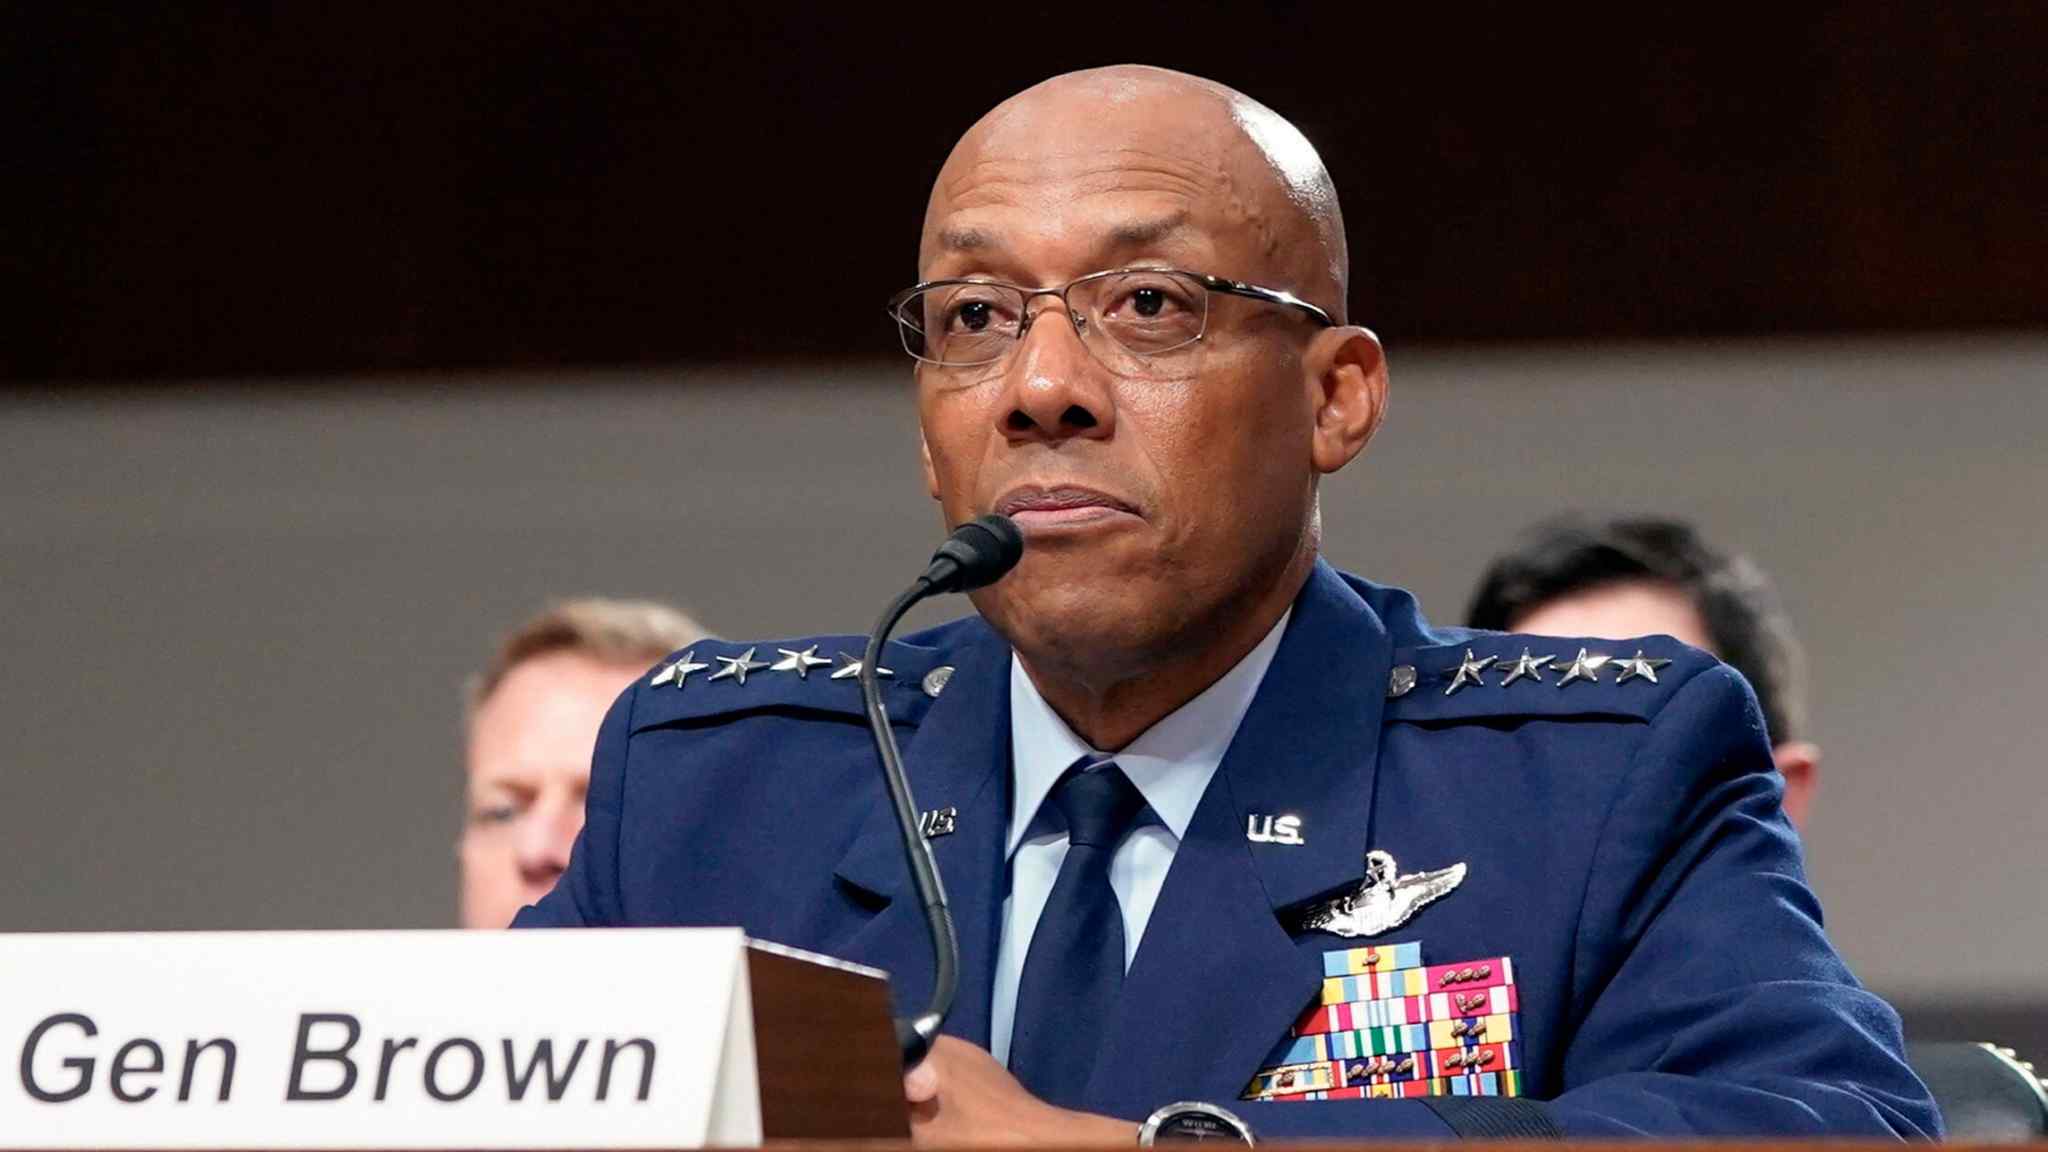 New head of the US military aims to dodge the political fray